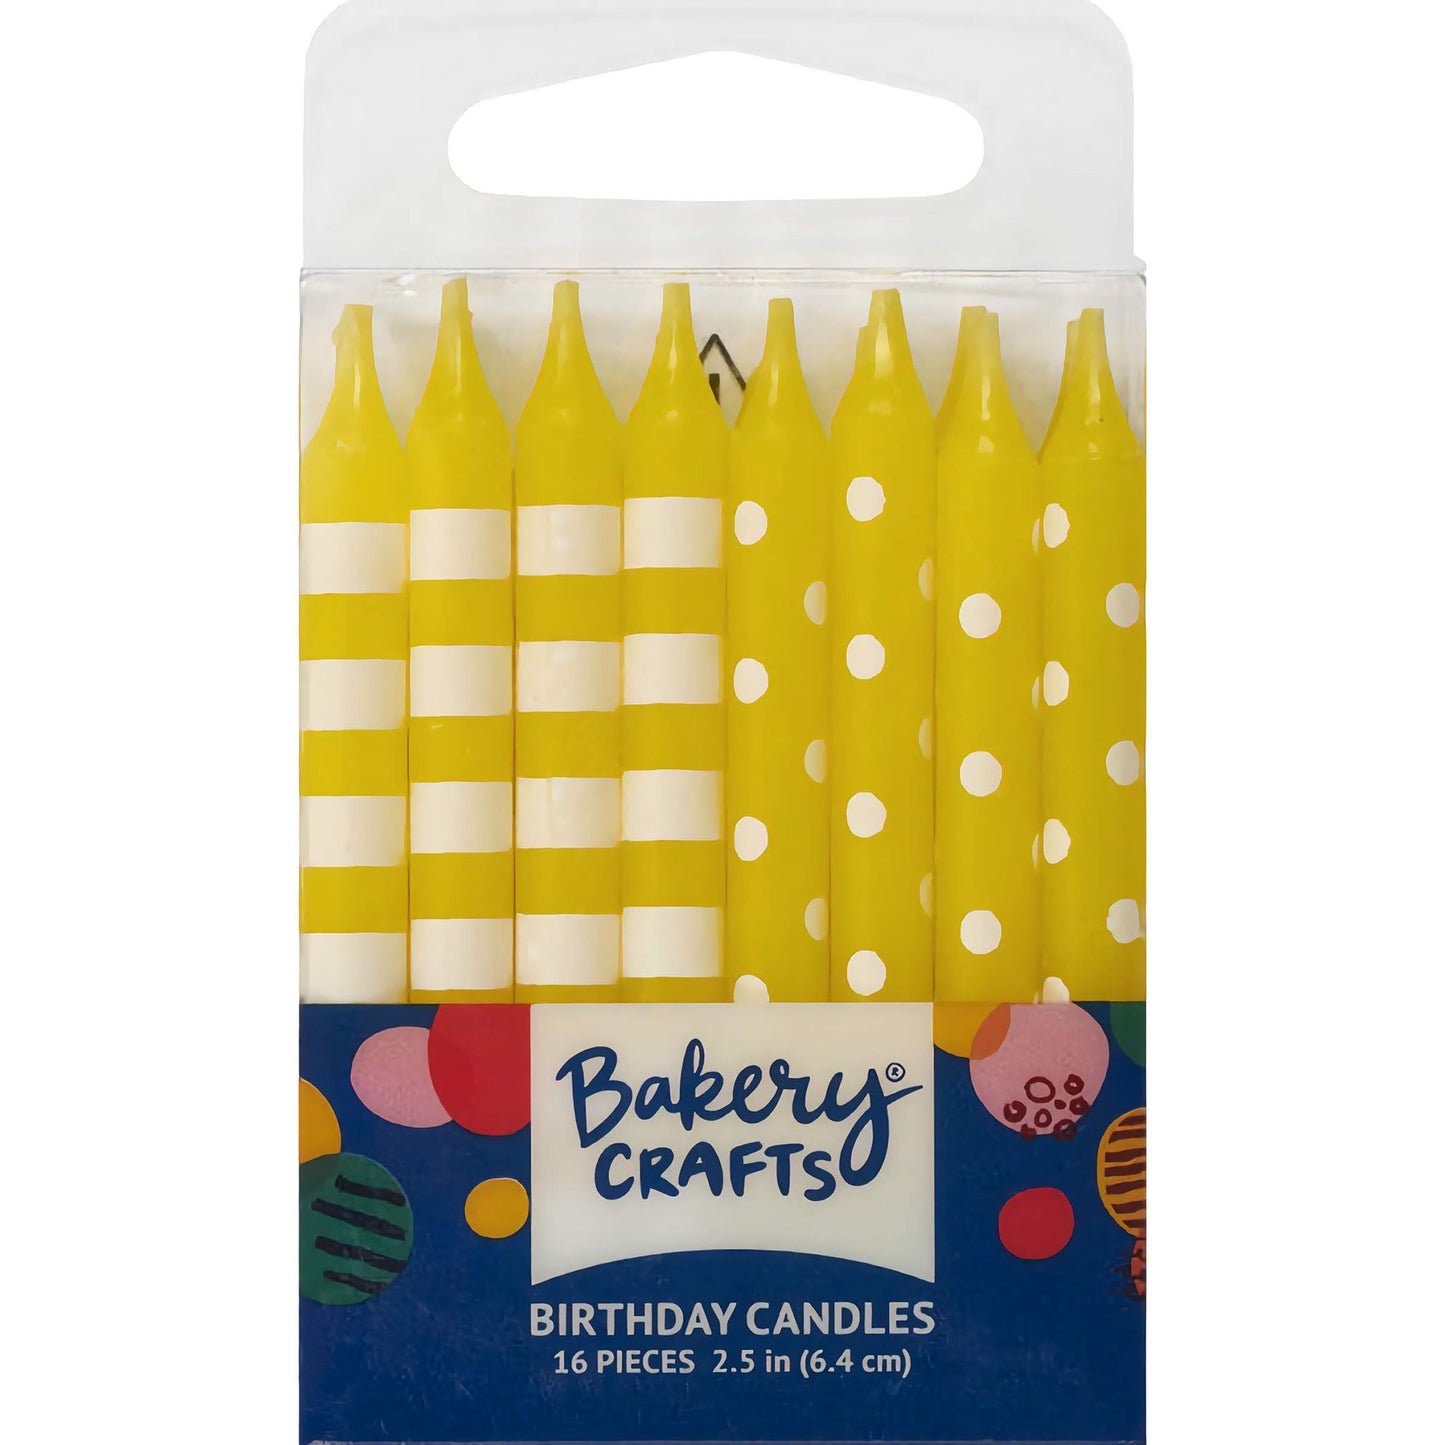 Pack of 16 Stripe & Dots Yellow Birthday Candles, each 2.5 inches tall, featuring a mix of white stripes and polka dots on a vibrant yellow background, perfect for any age and celebration.